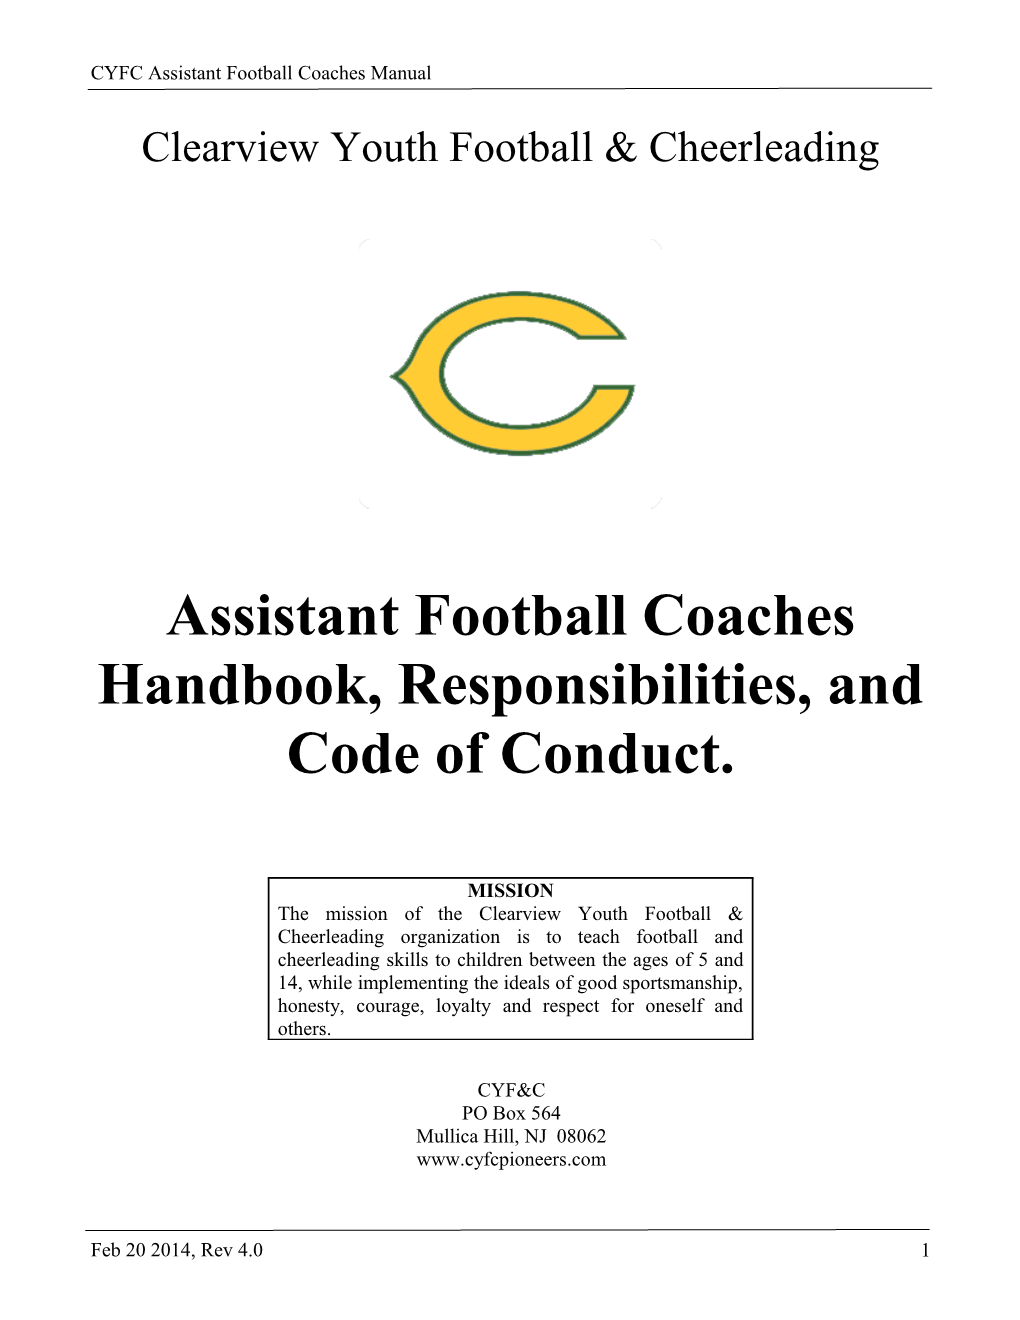 Clearview Youth Football & Cheerleading